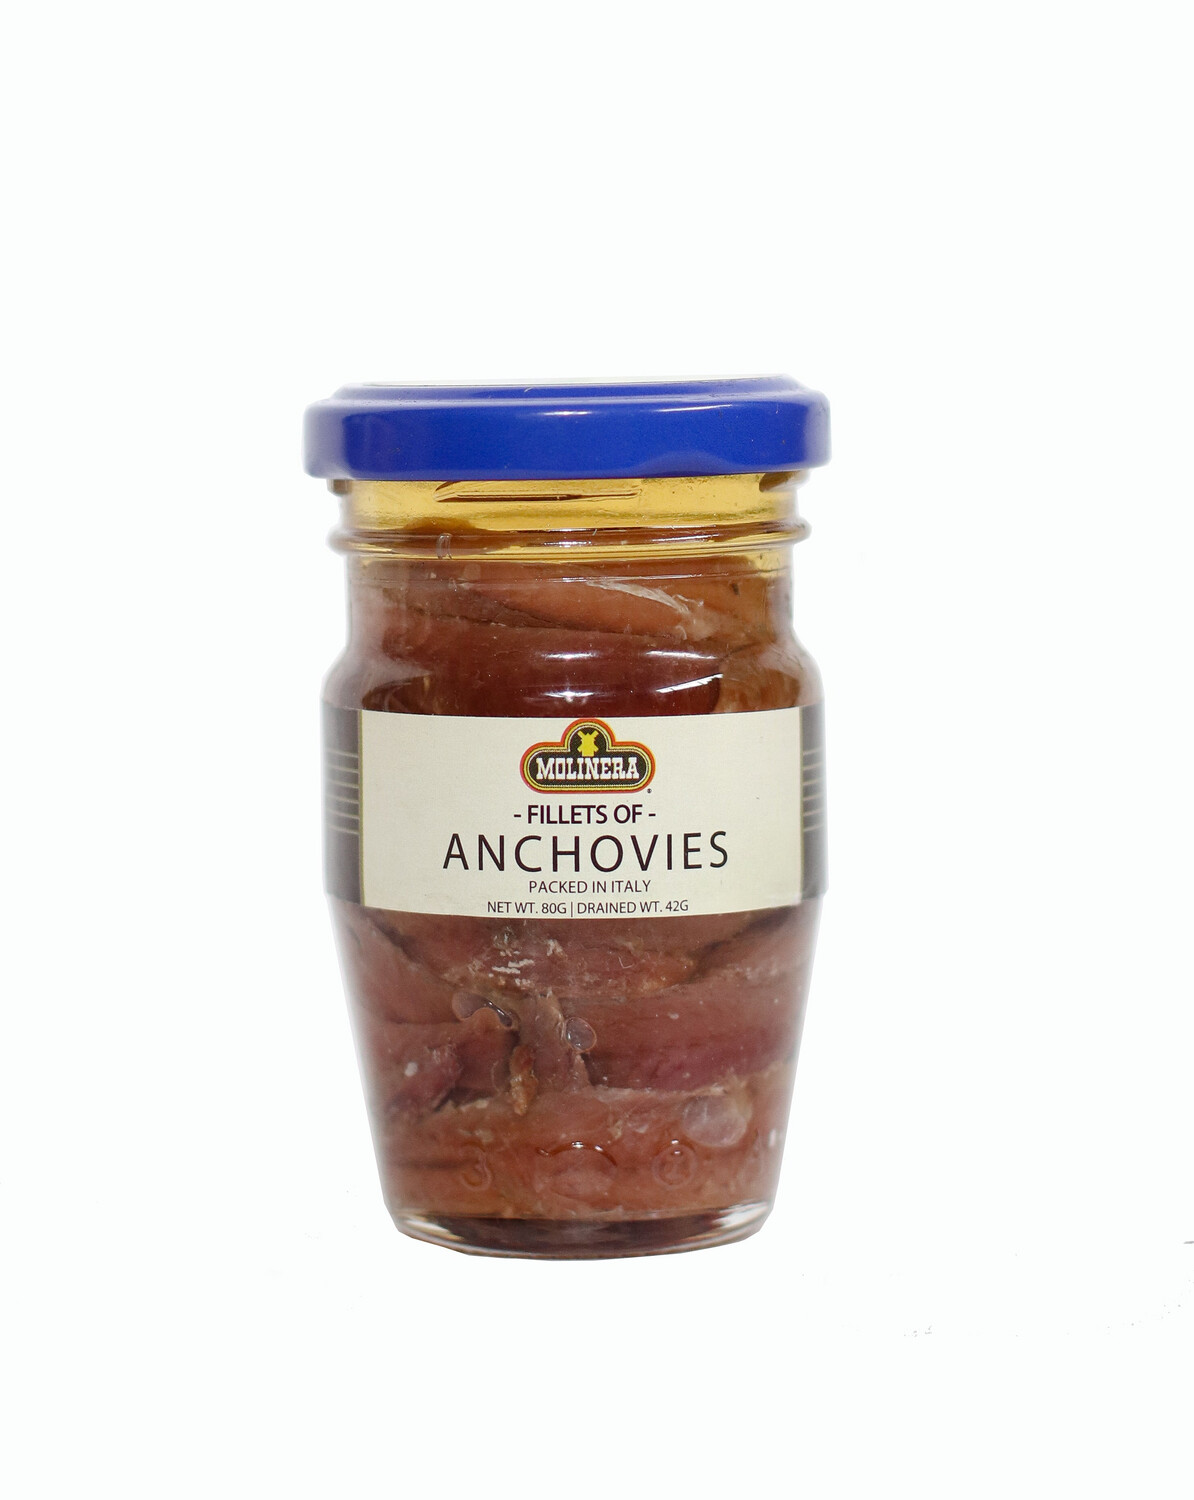 Molinera ANCHOVY FILLETS IN OIL 80g